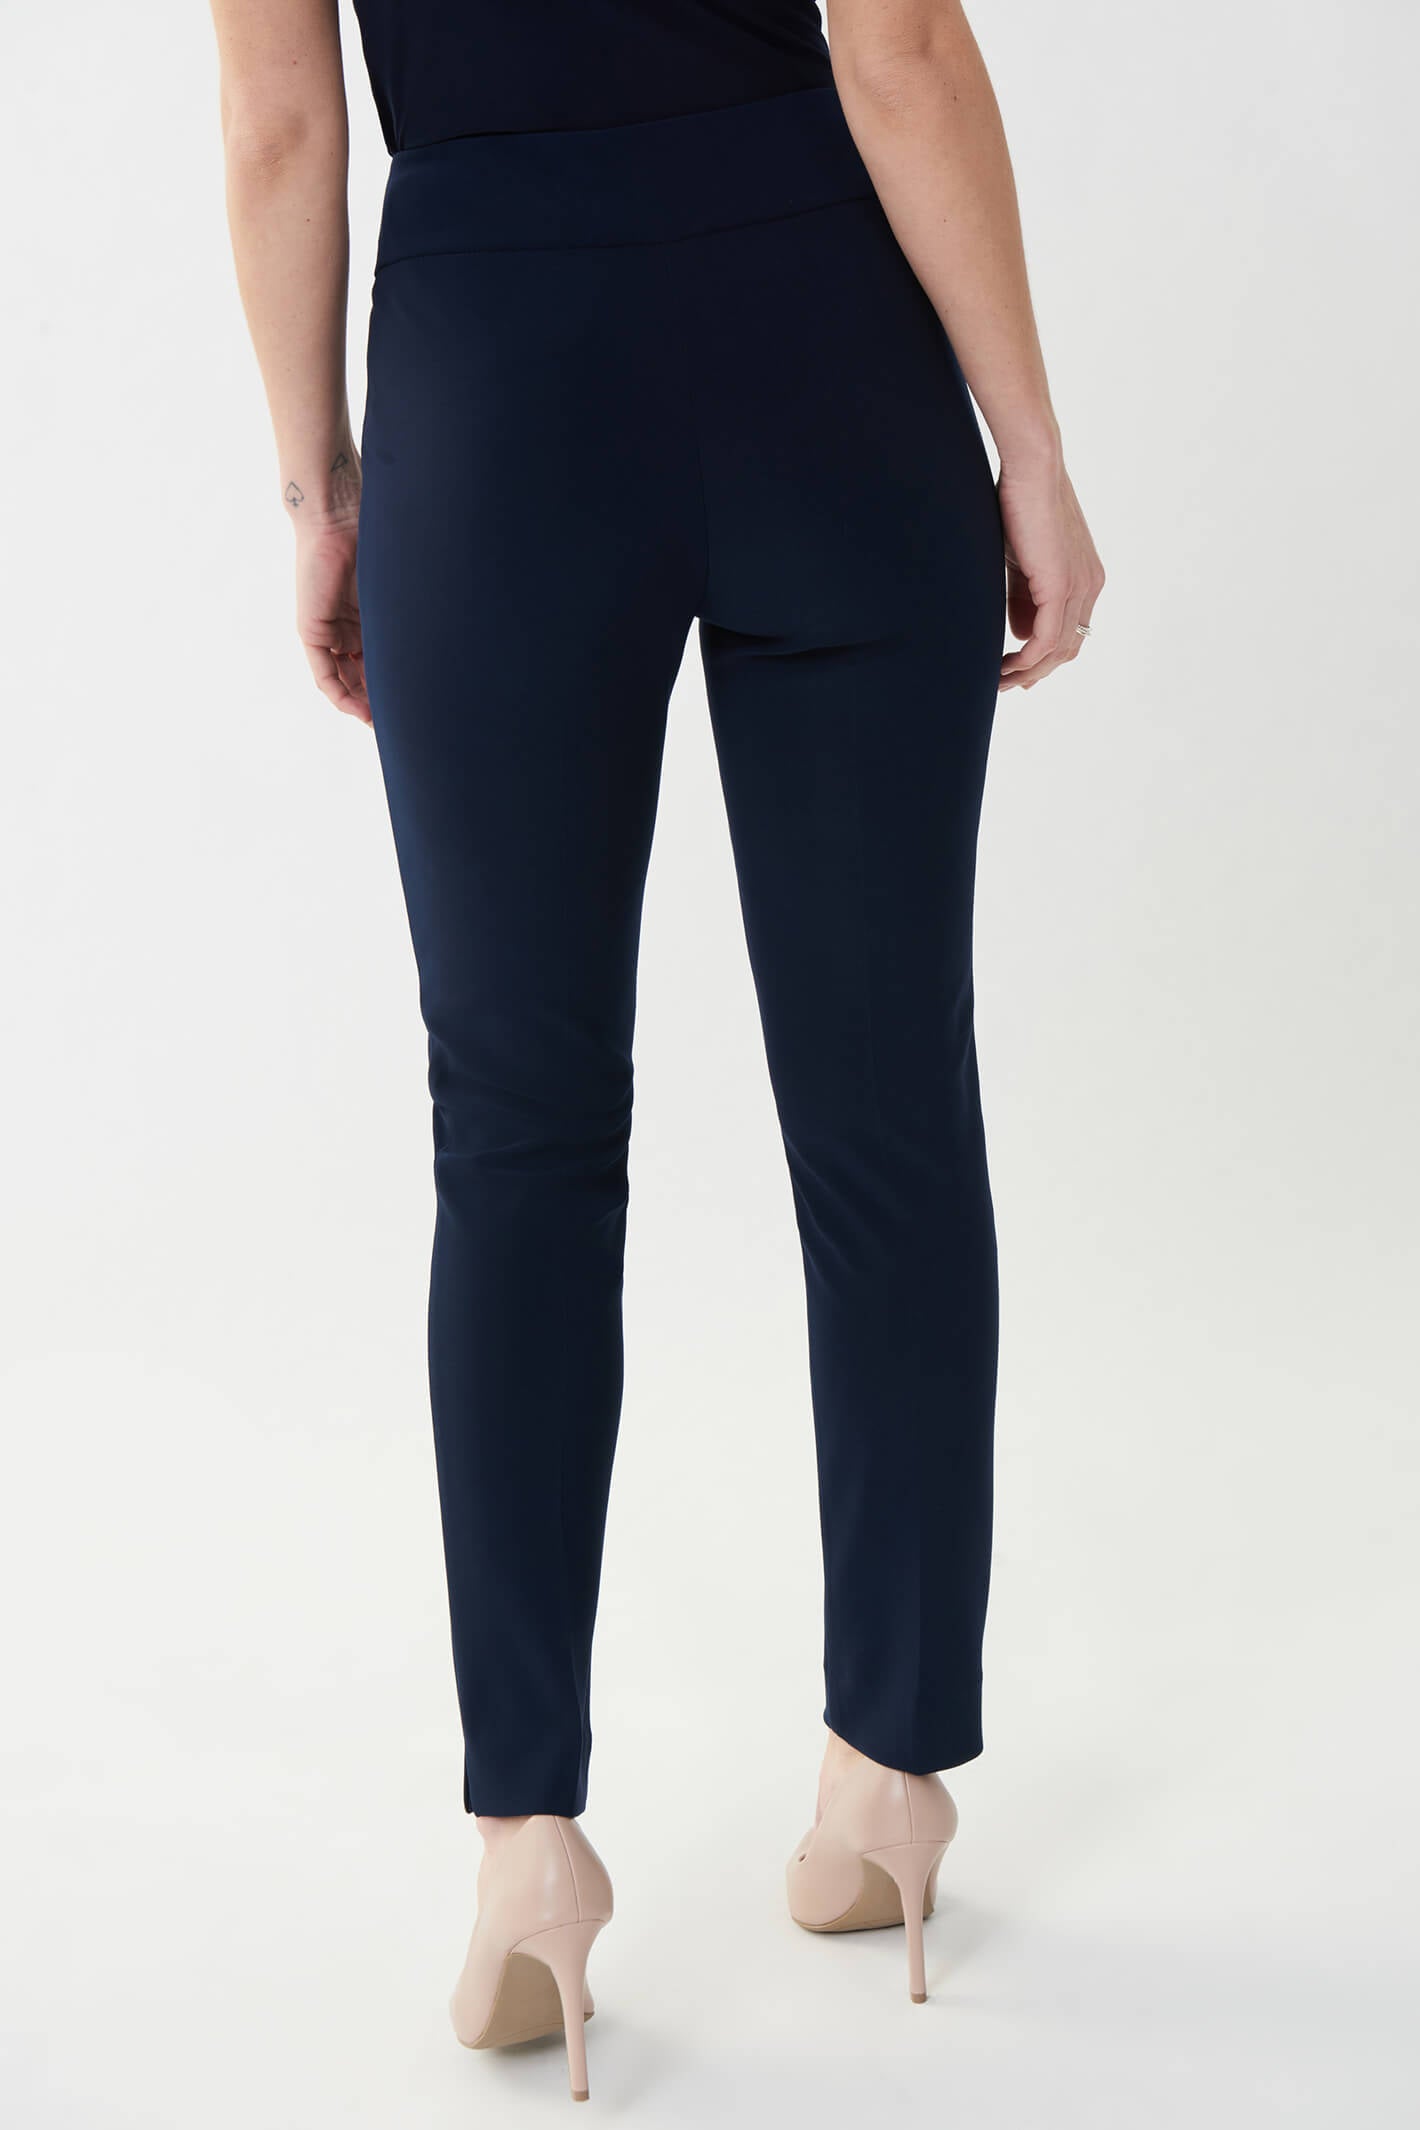 Byford by Pantaloons Midnight Blue Slim Fit Trousers